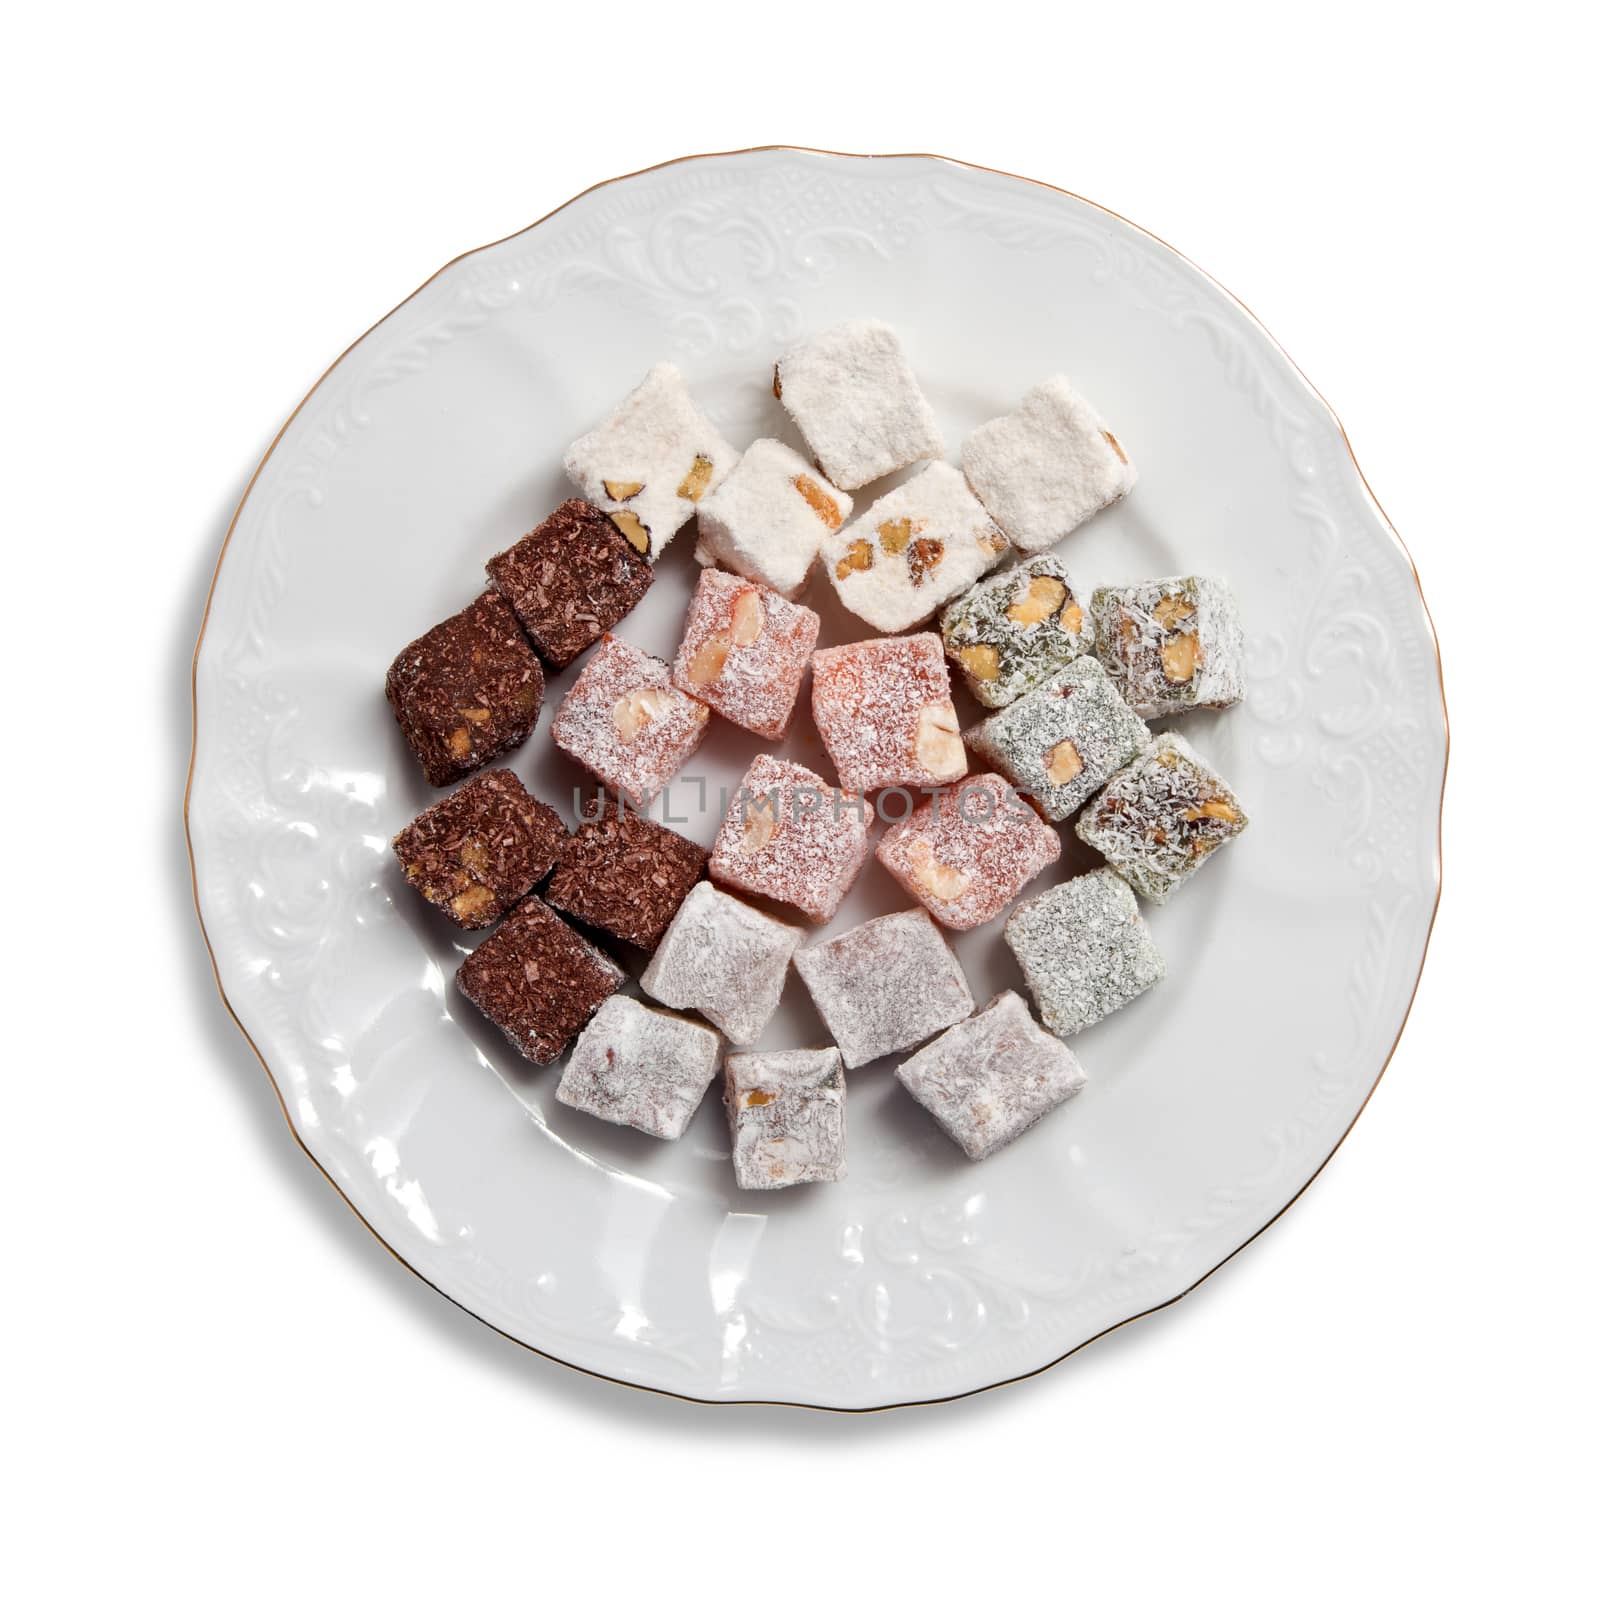 Plate with turkish delight, view from above